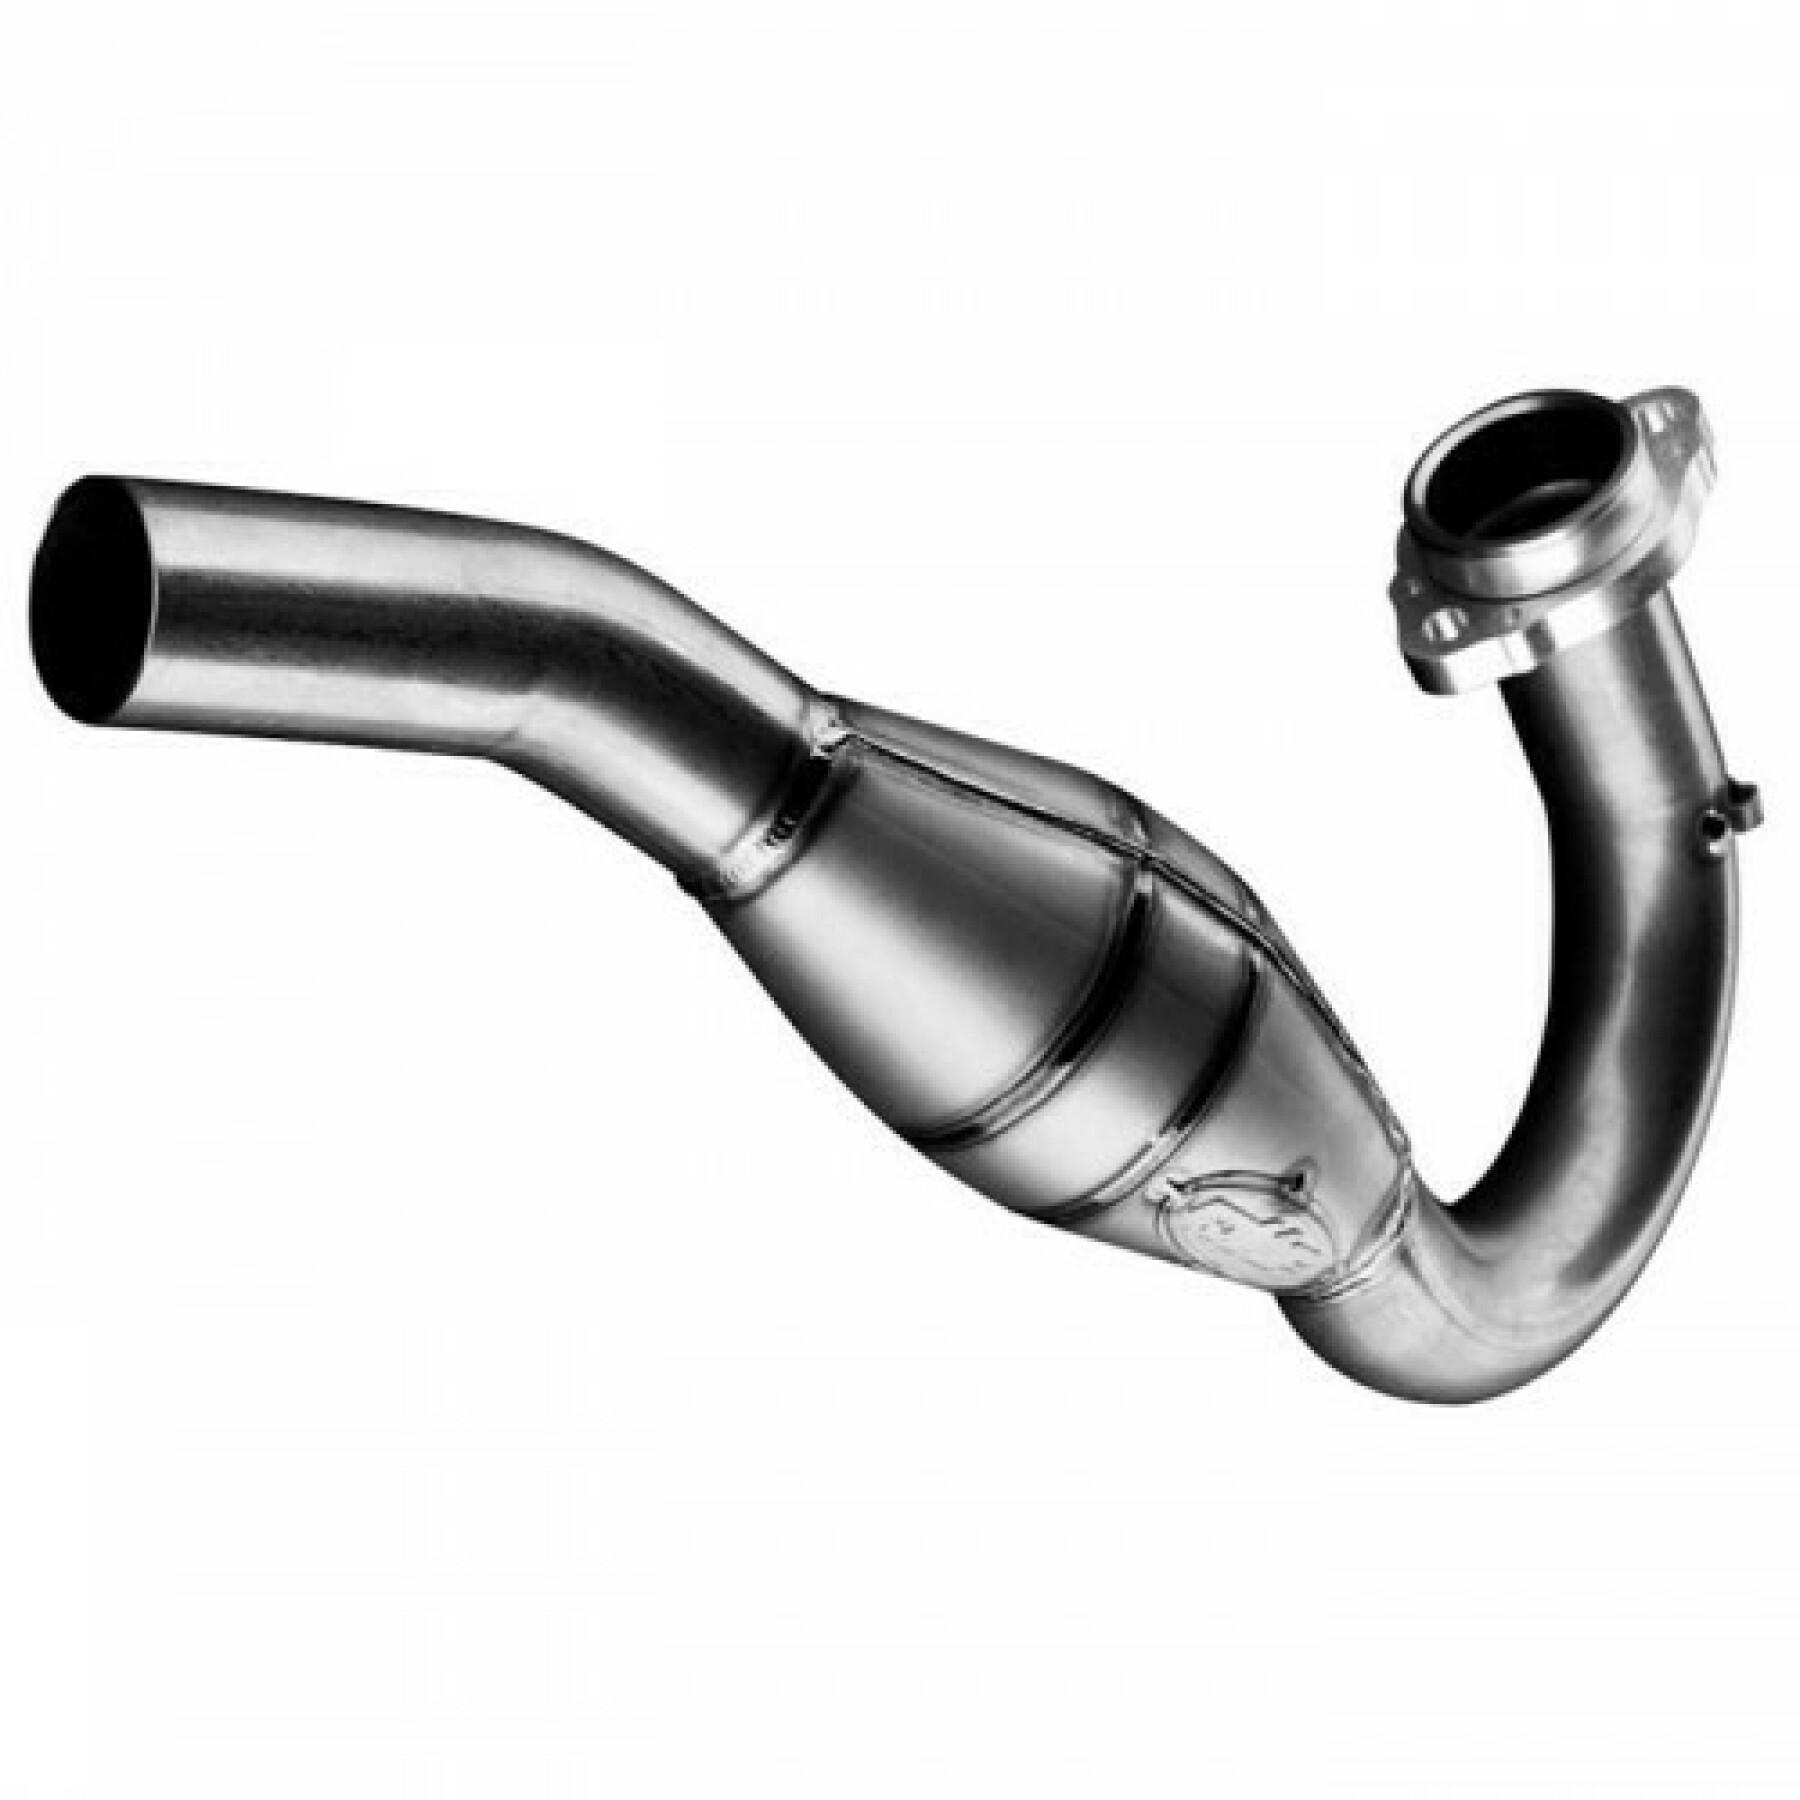 motorcycle exhaust FMF ktm 450sx-f'12-15/xc-f'13-15 fe'14 s/s header/megabomb mid pipe